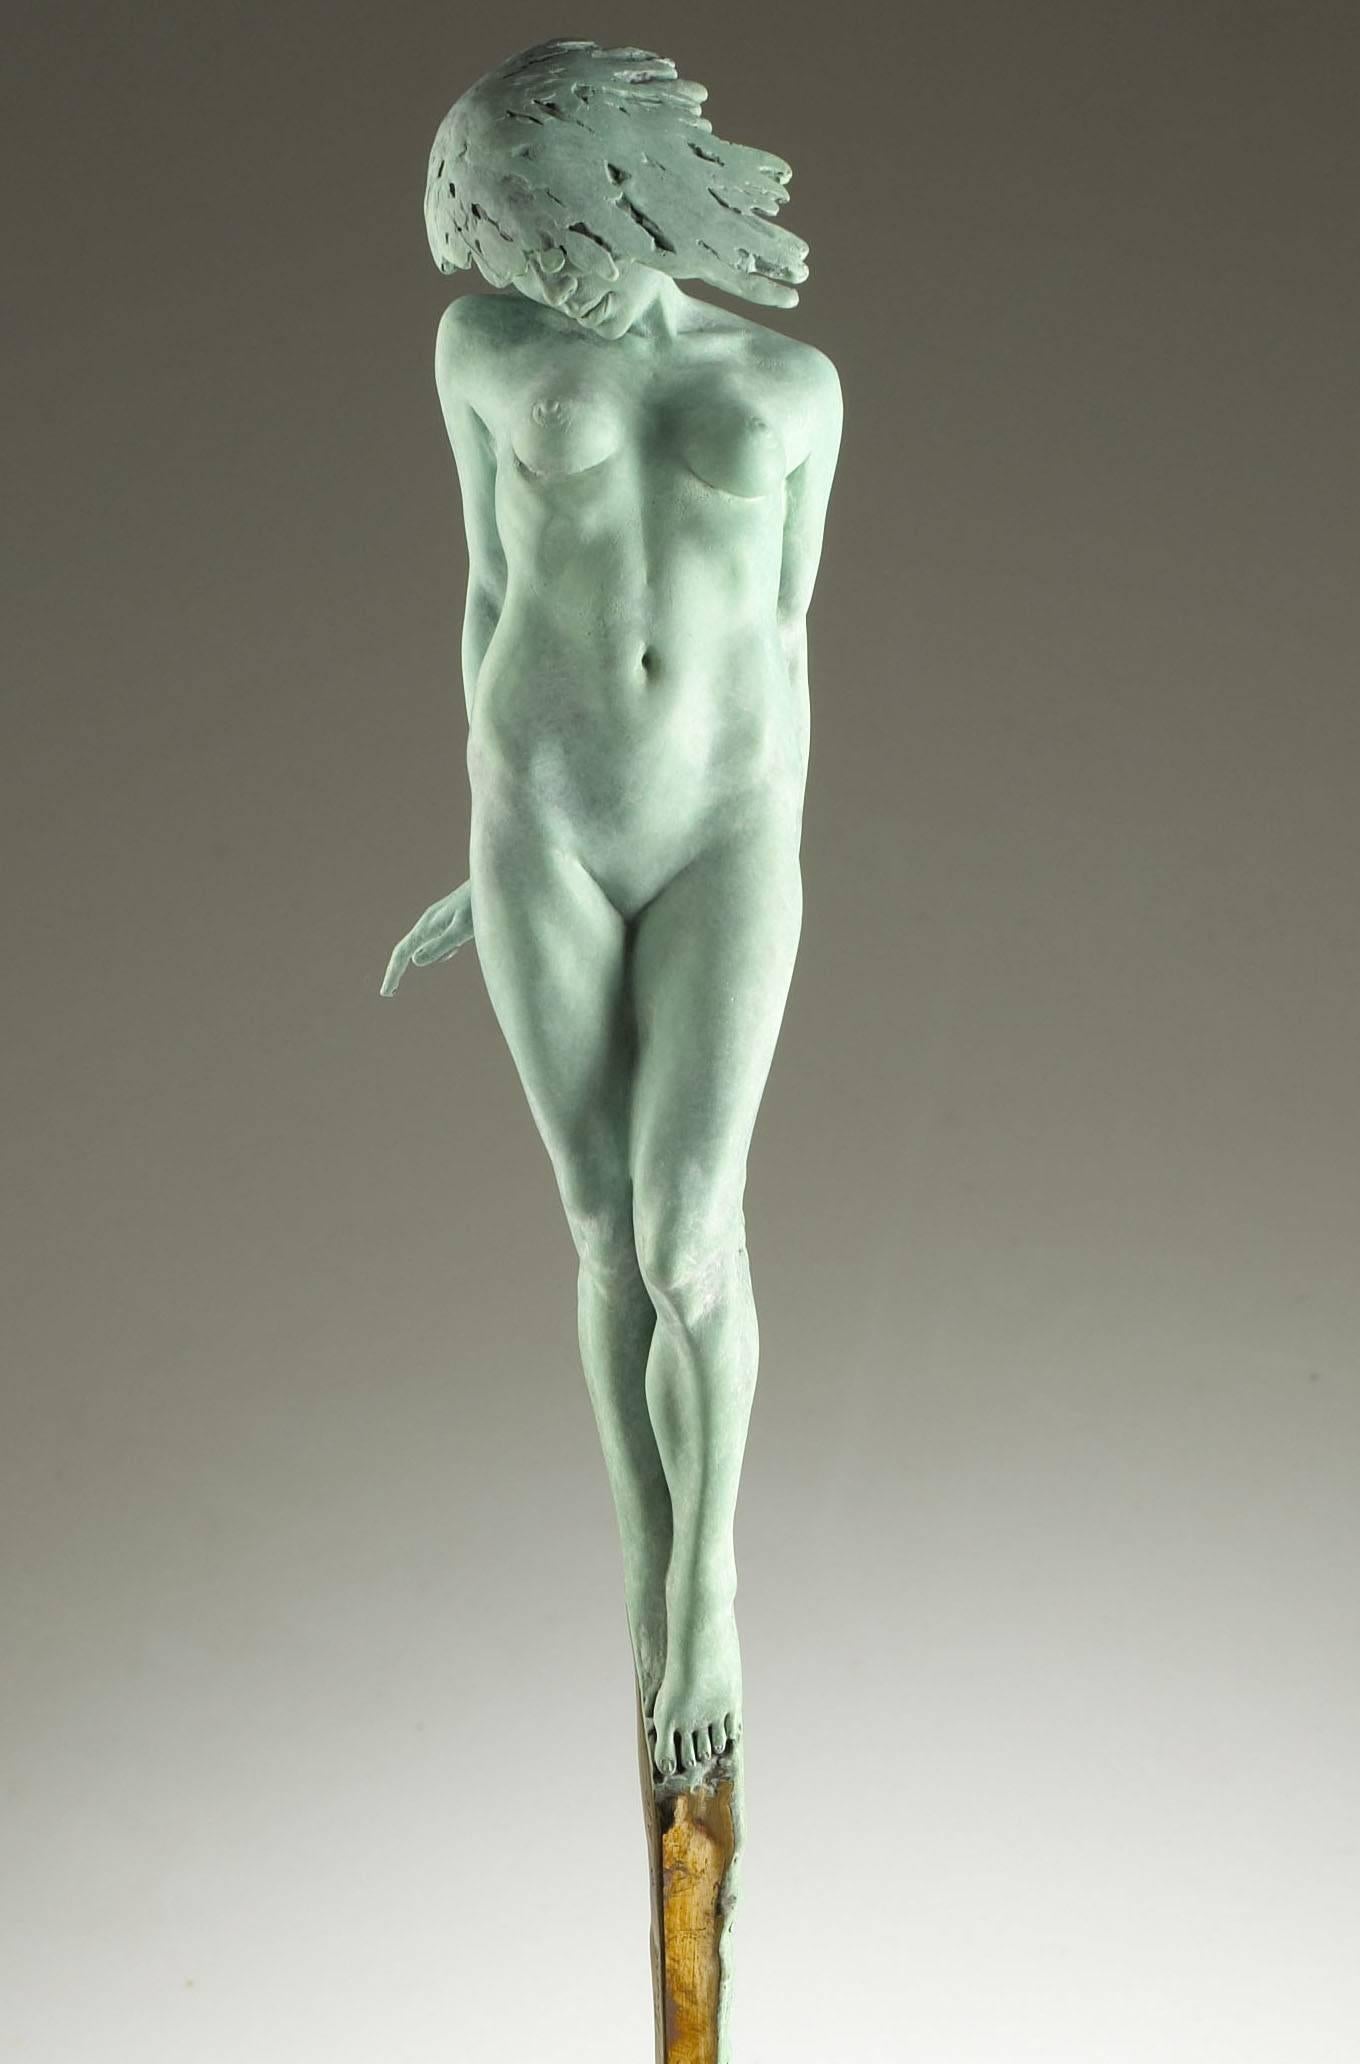  'Le Pucelle' by Carl Payne is a stunning Contemporary Nude Bronze Sculpture.

Continuing a successful career in England and Ireland, Carl joined Callaghan Fine Paintings and Works of Art at the beginning of 2004 in order to dedicate his time to